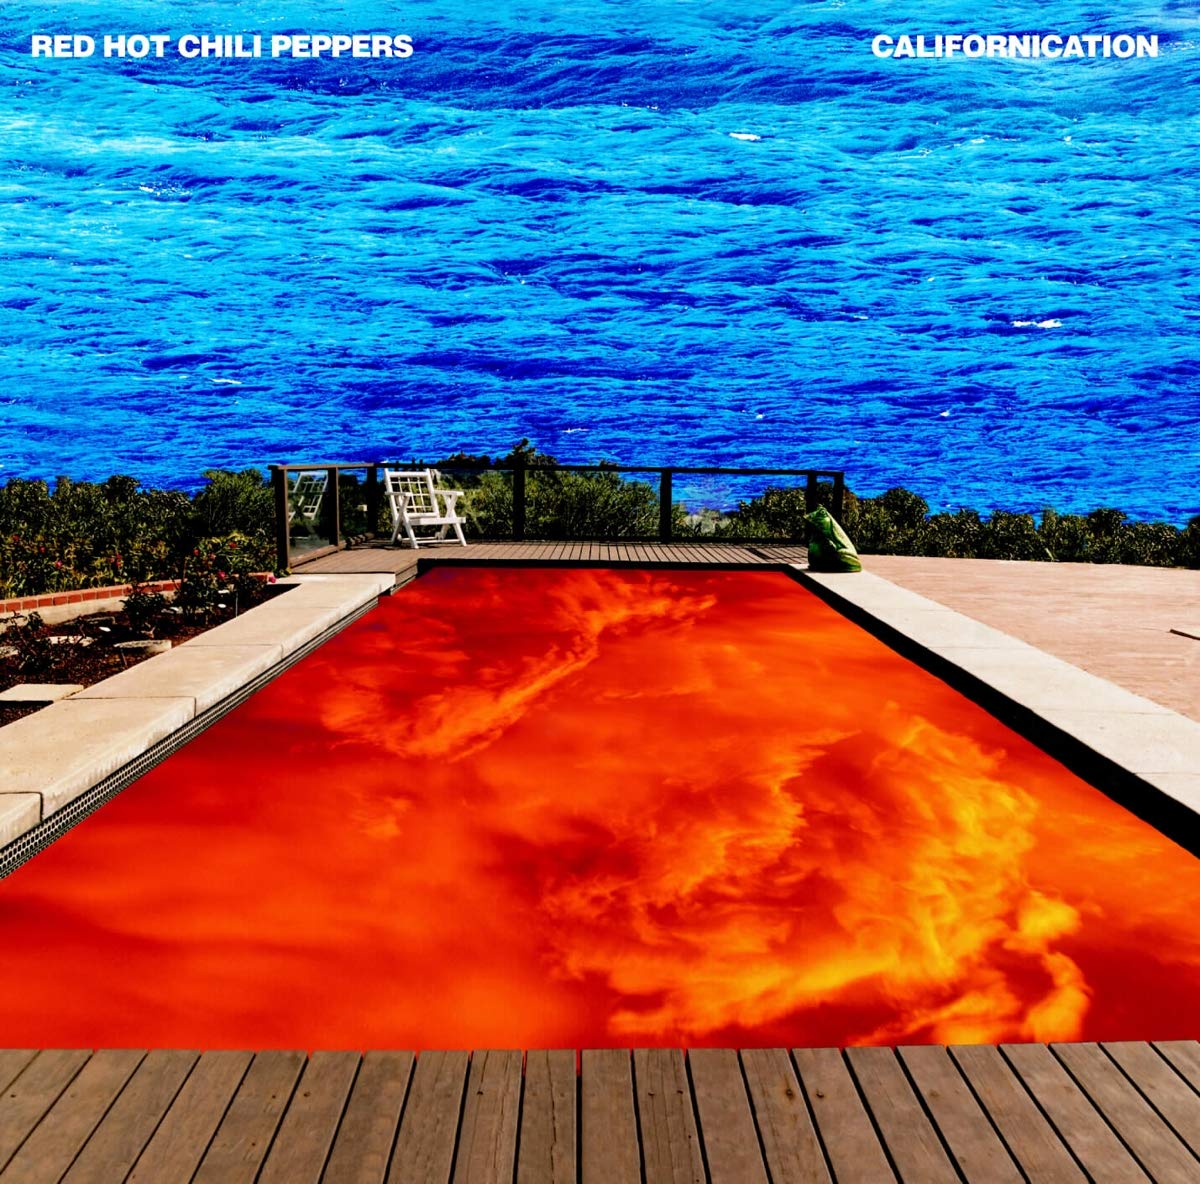 RED HOT CHILI PEPPERS - CALIFORNICATION - 2-LP - VINYL LP